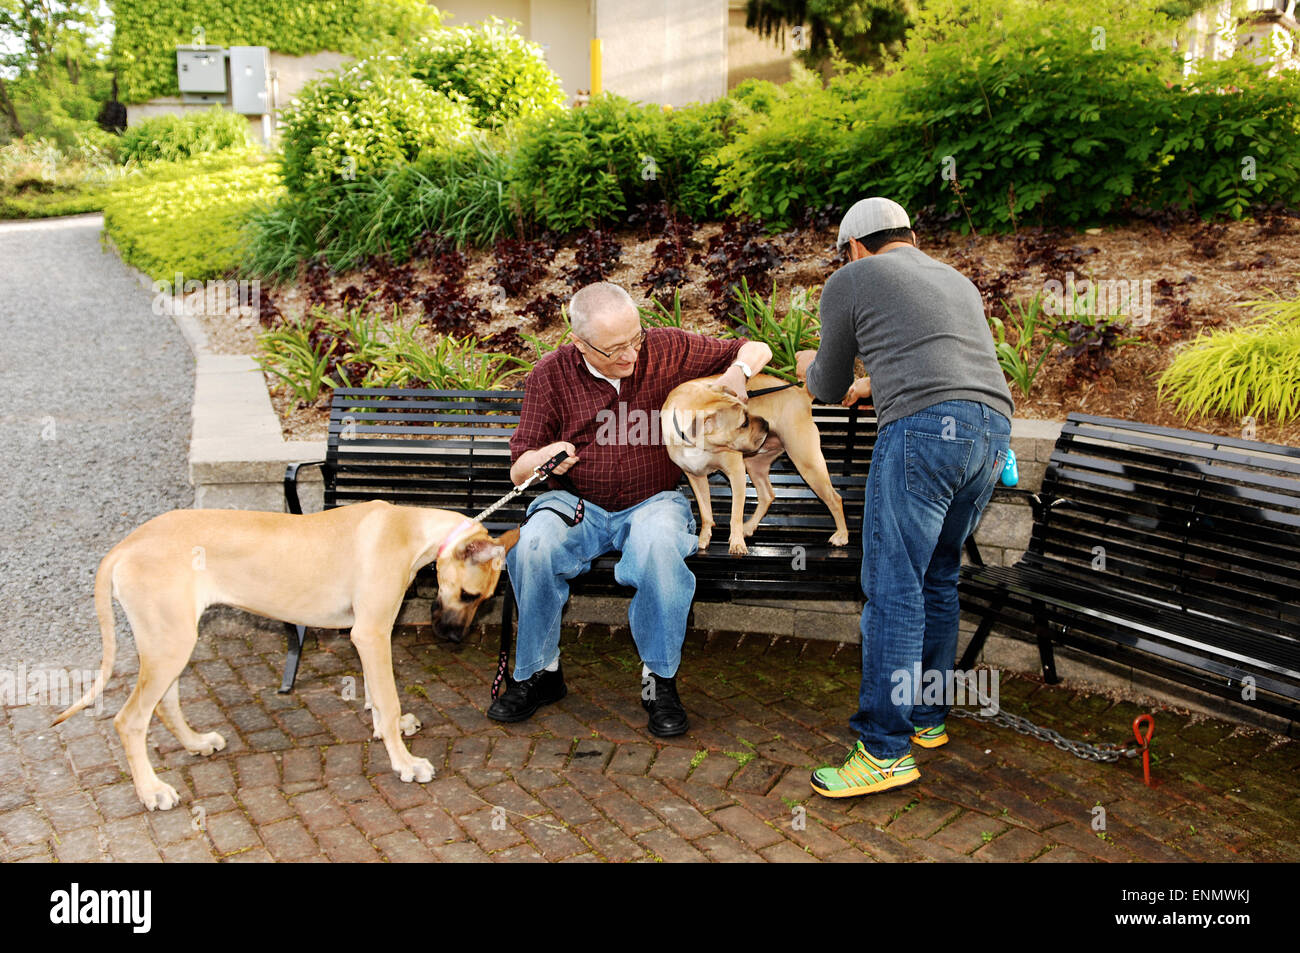 Two man with two dog's sitting on a park bench, one dog a sharbei and the other a Great Dane. Stock Photo